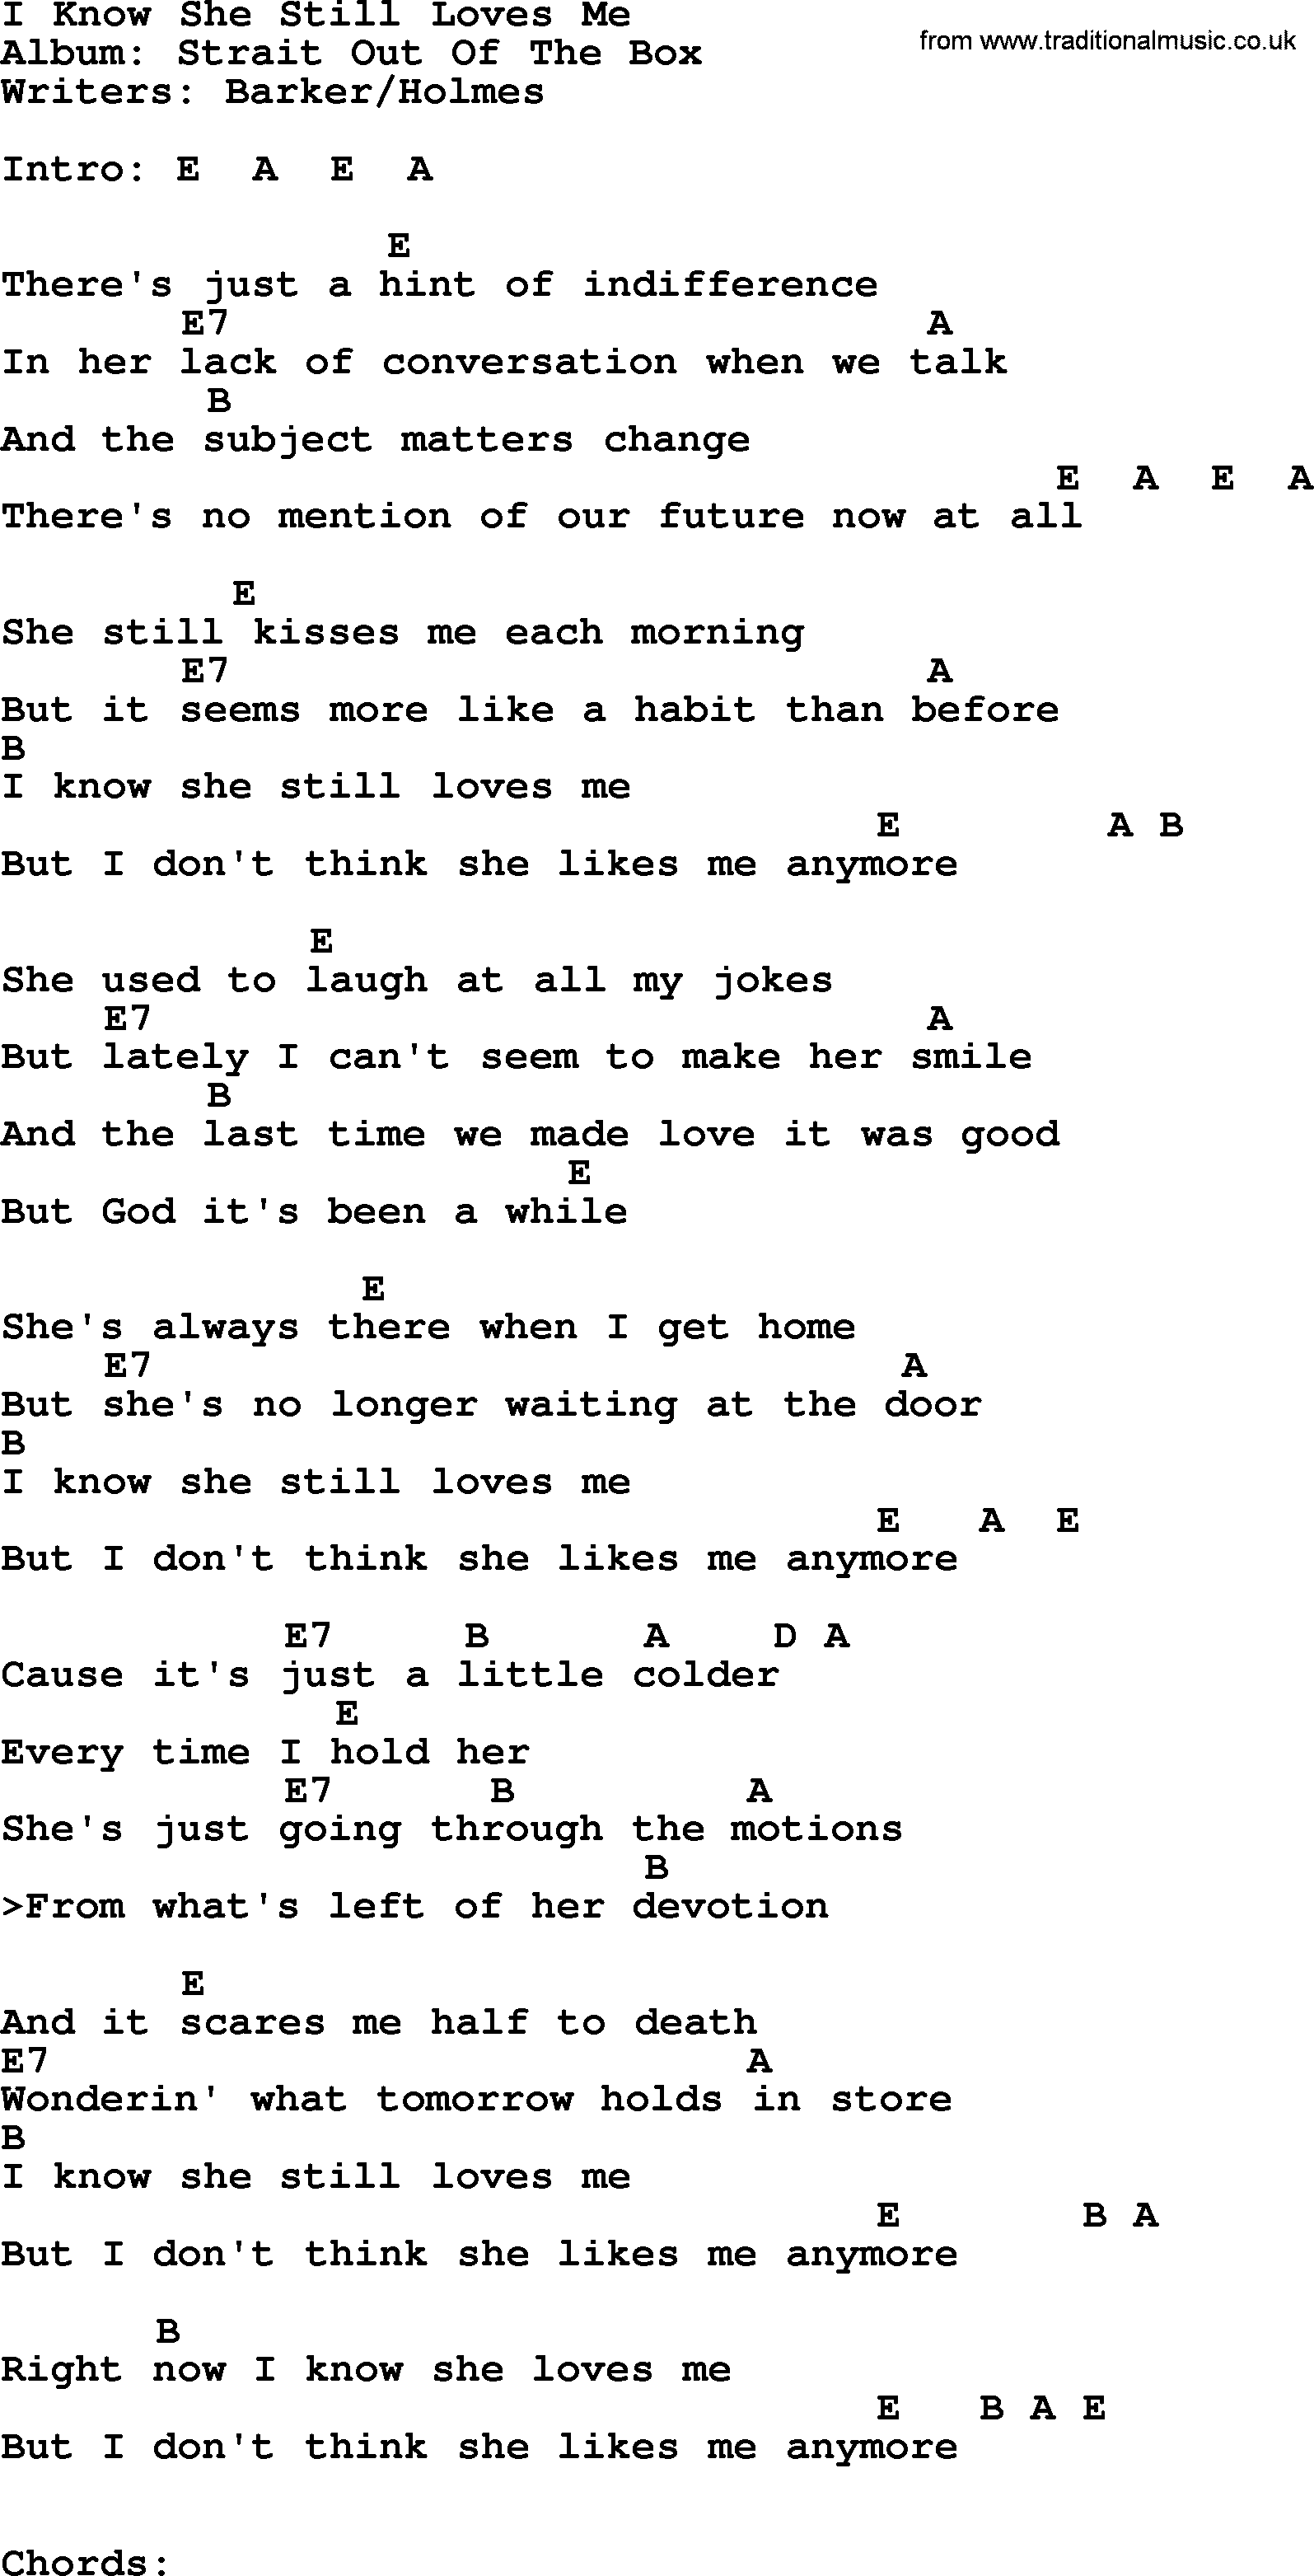 George Strait song: I Know She Still Loves Me, lyrics and chords